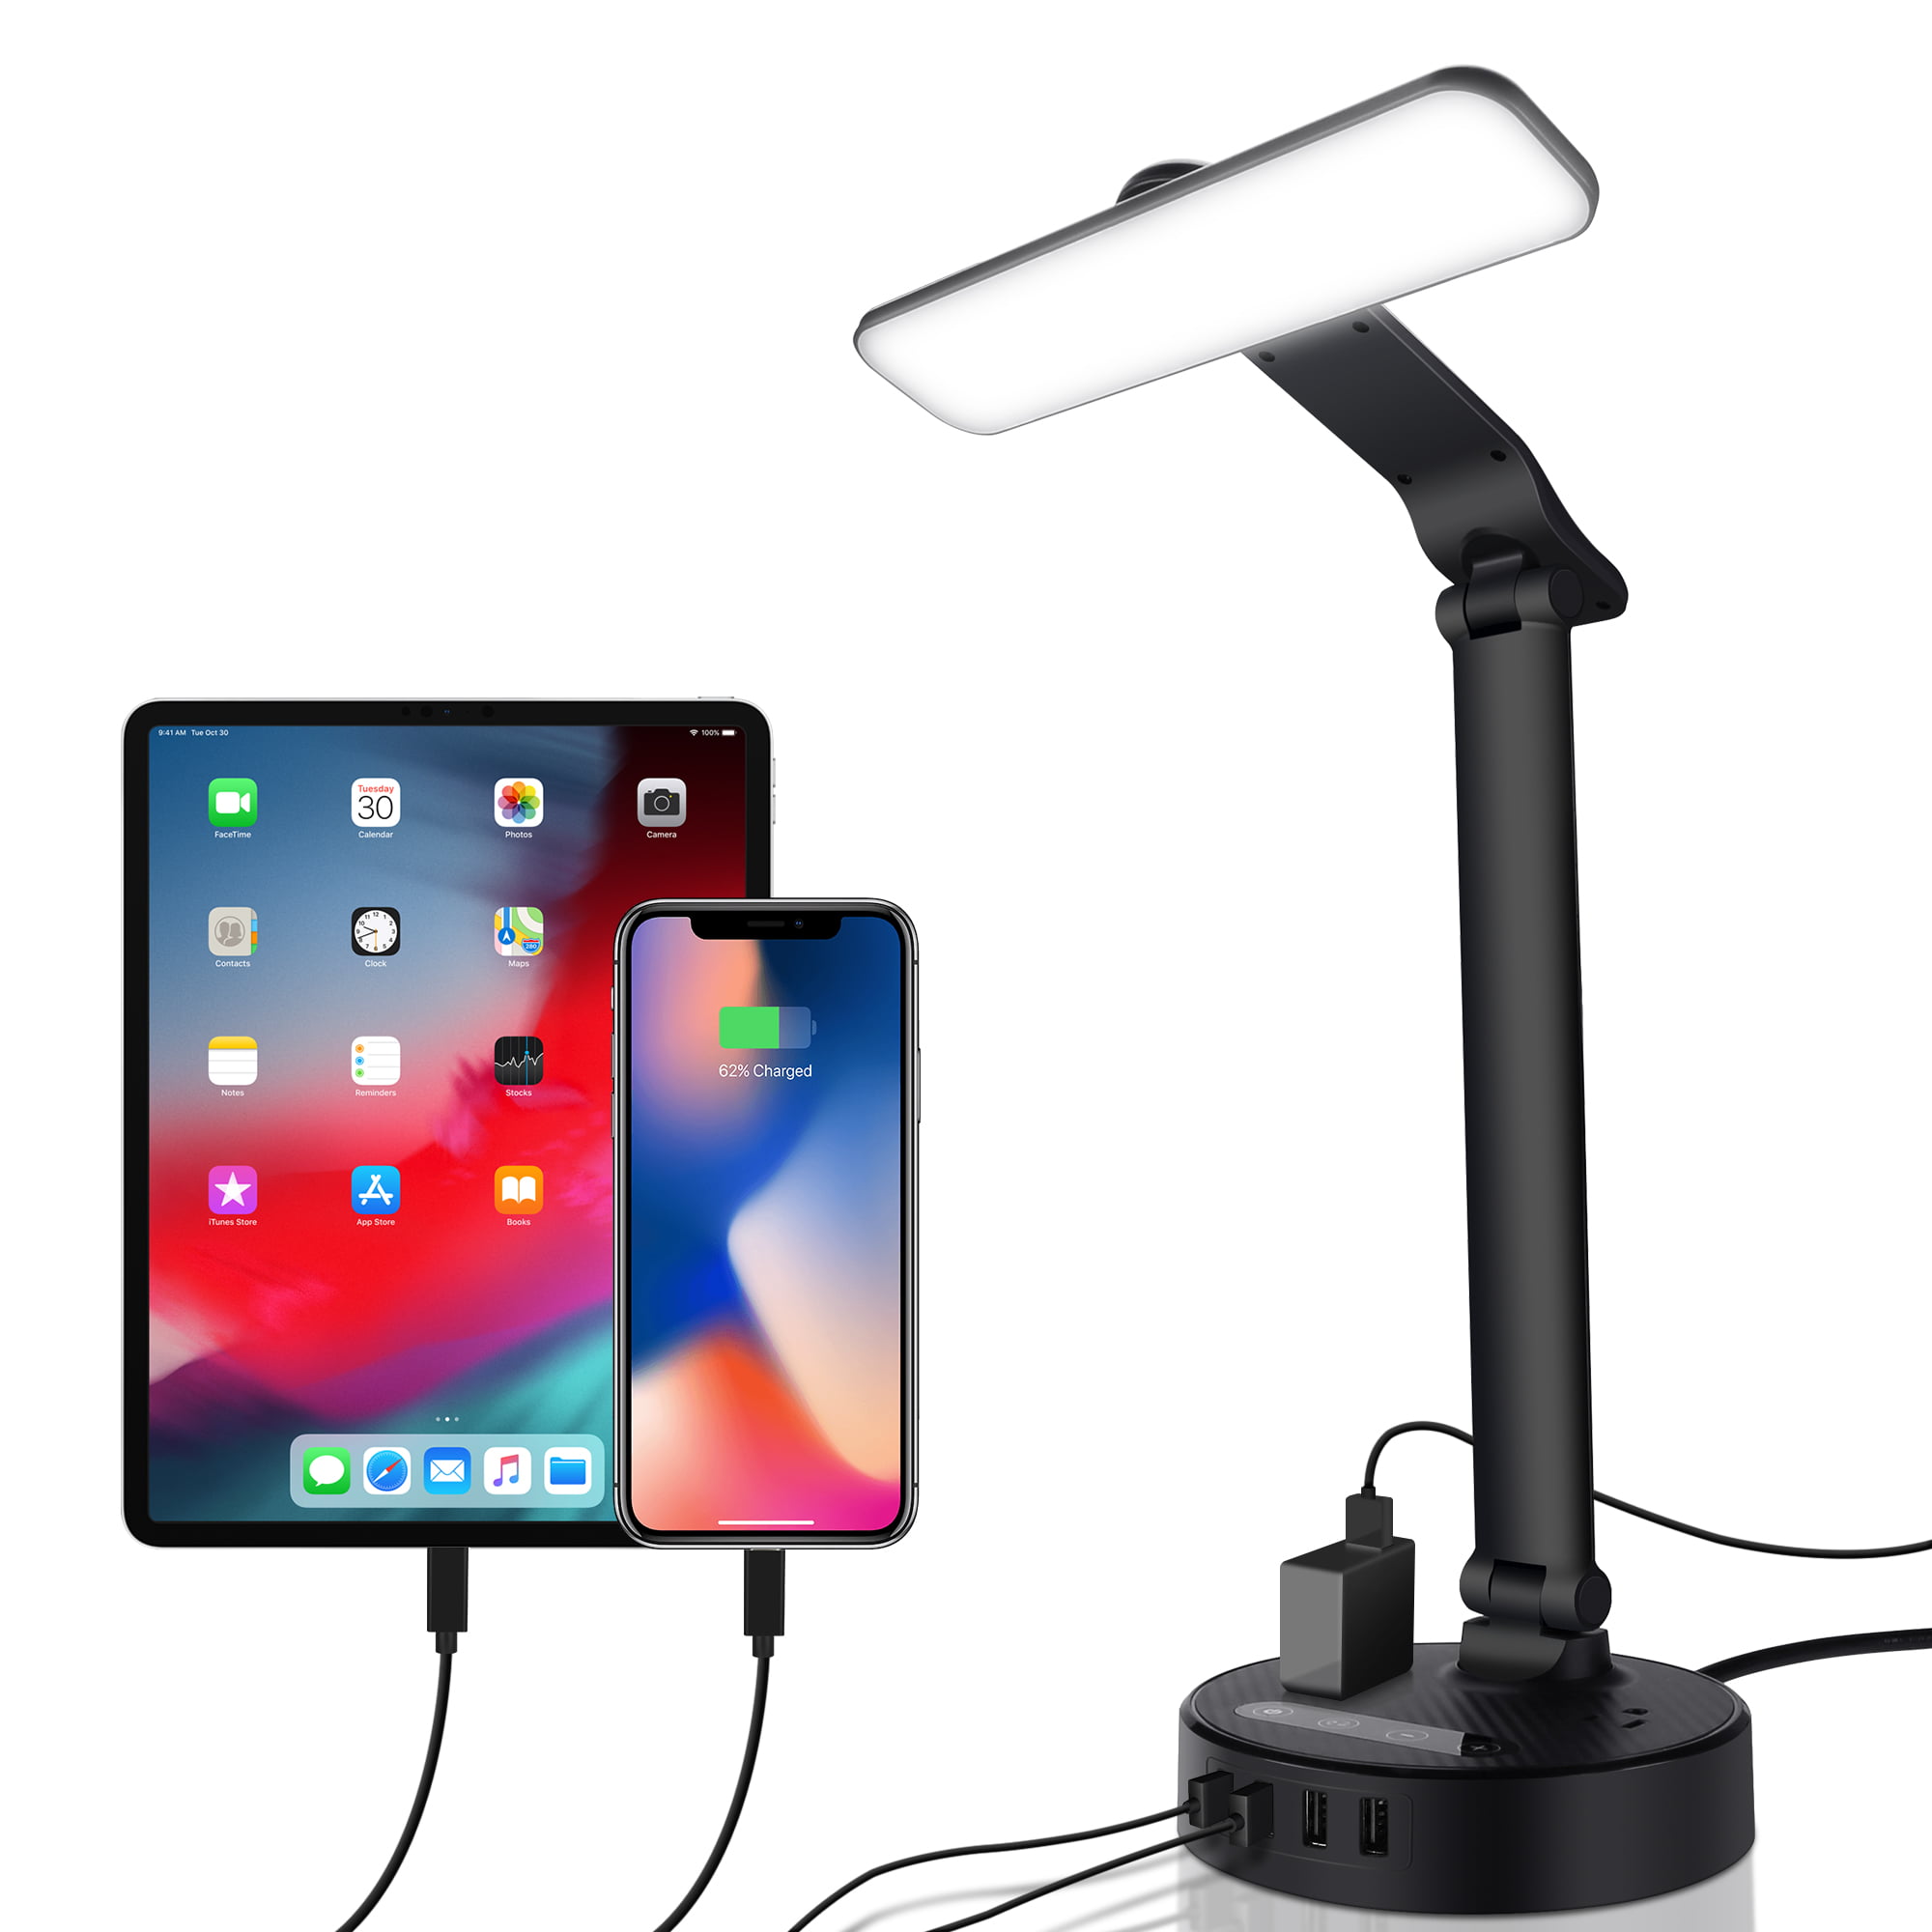 Portable LED USB Touch Switch Light Lamp Desk Study Read For Notebook HP 